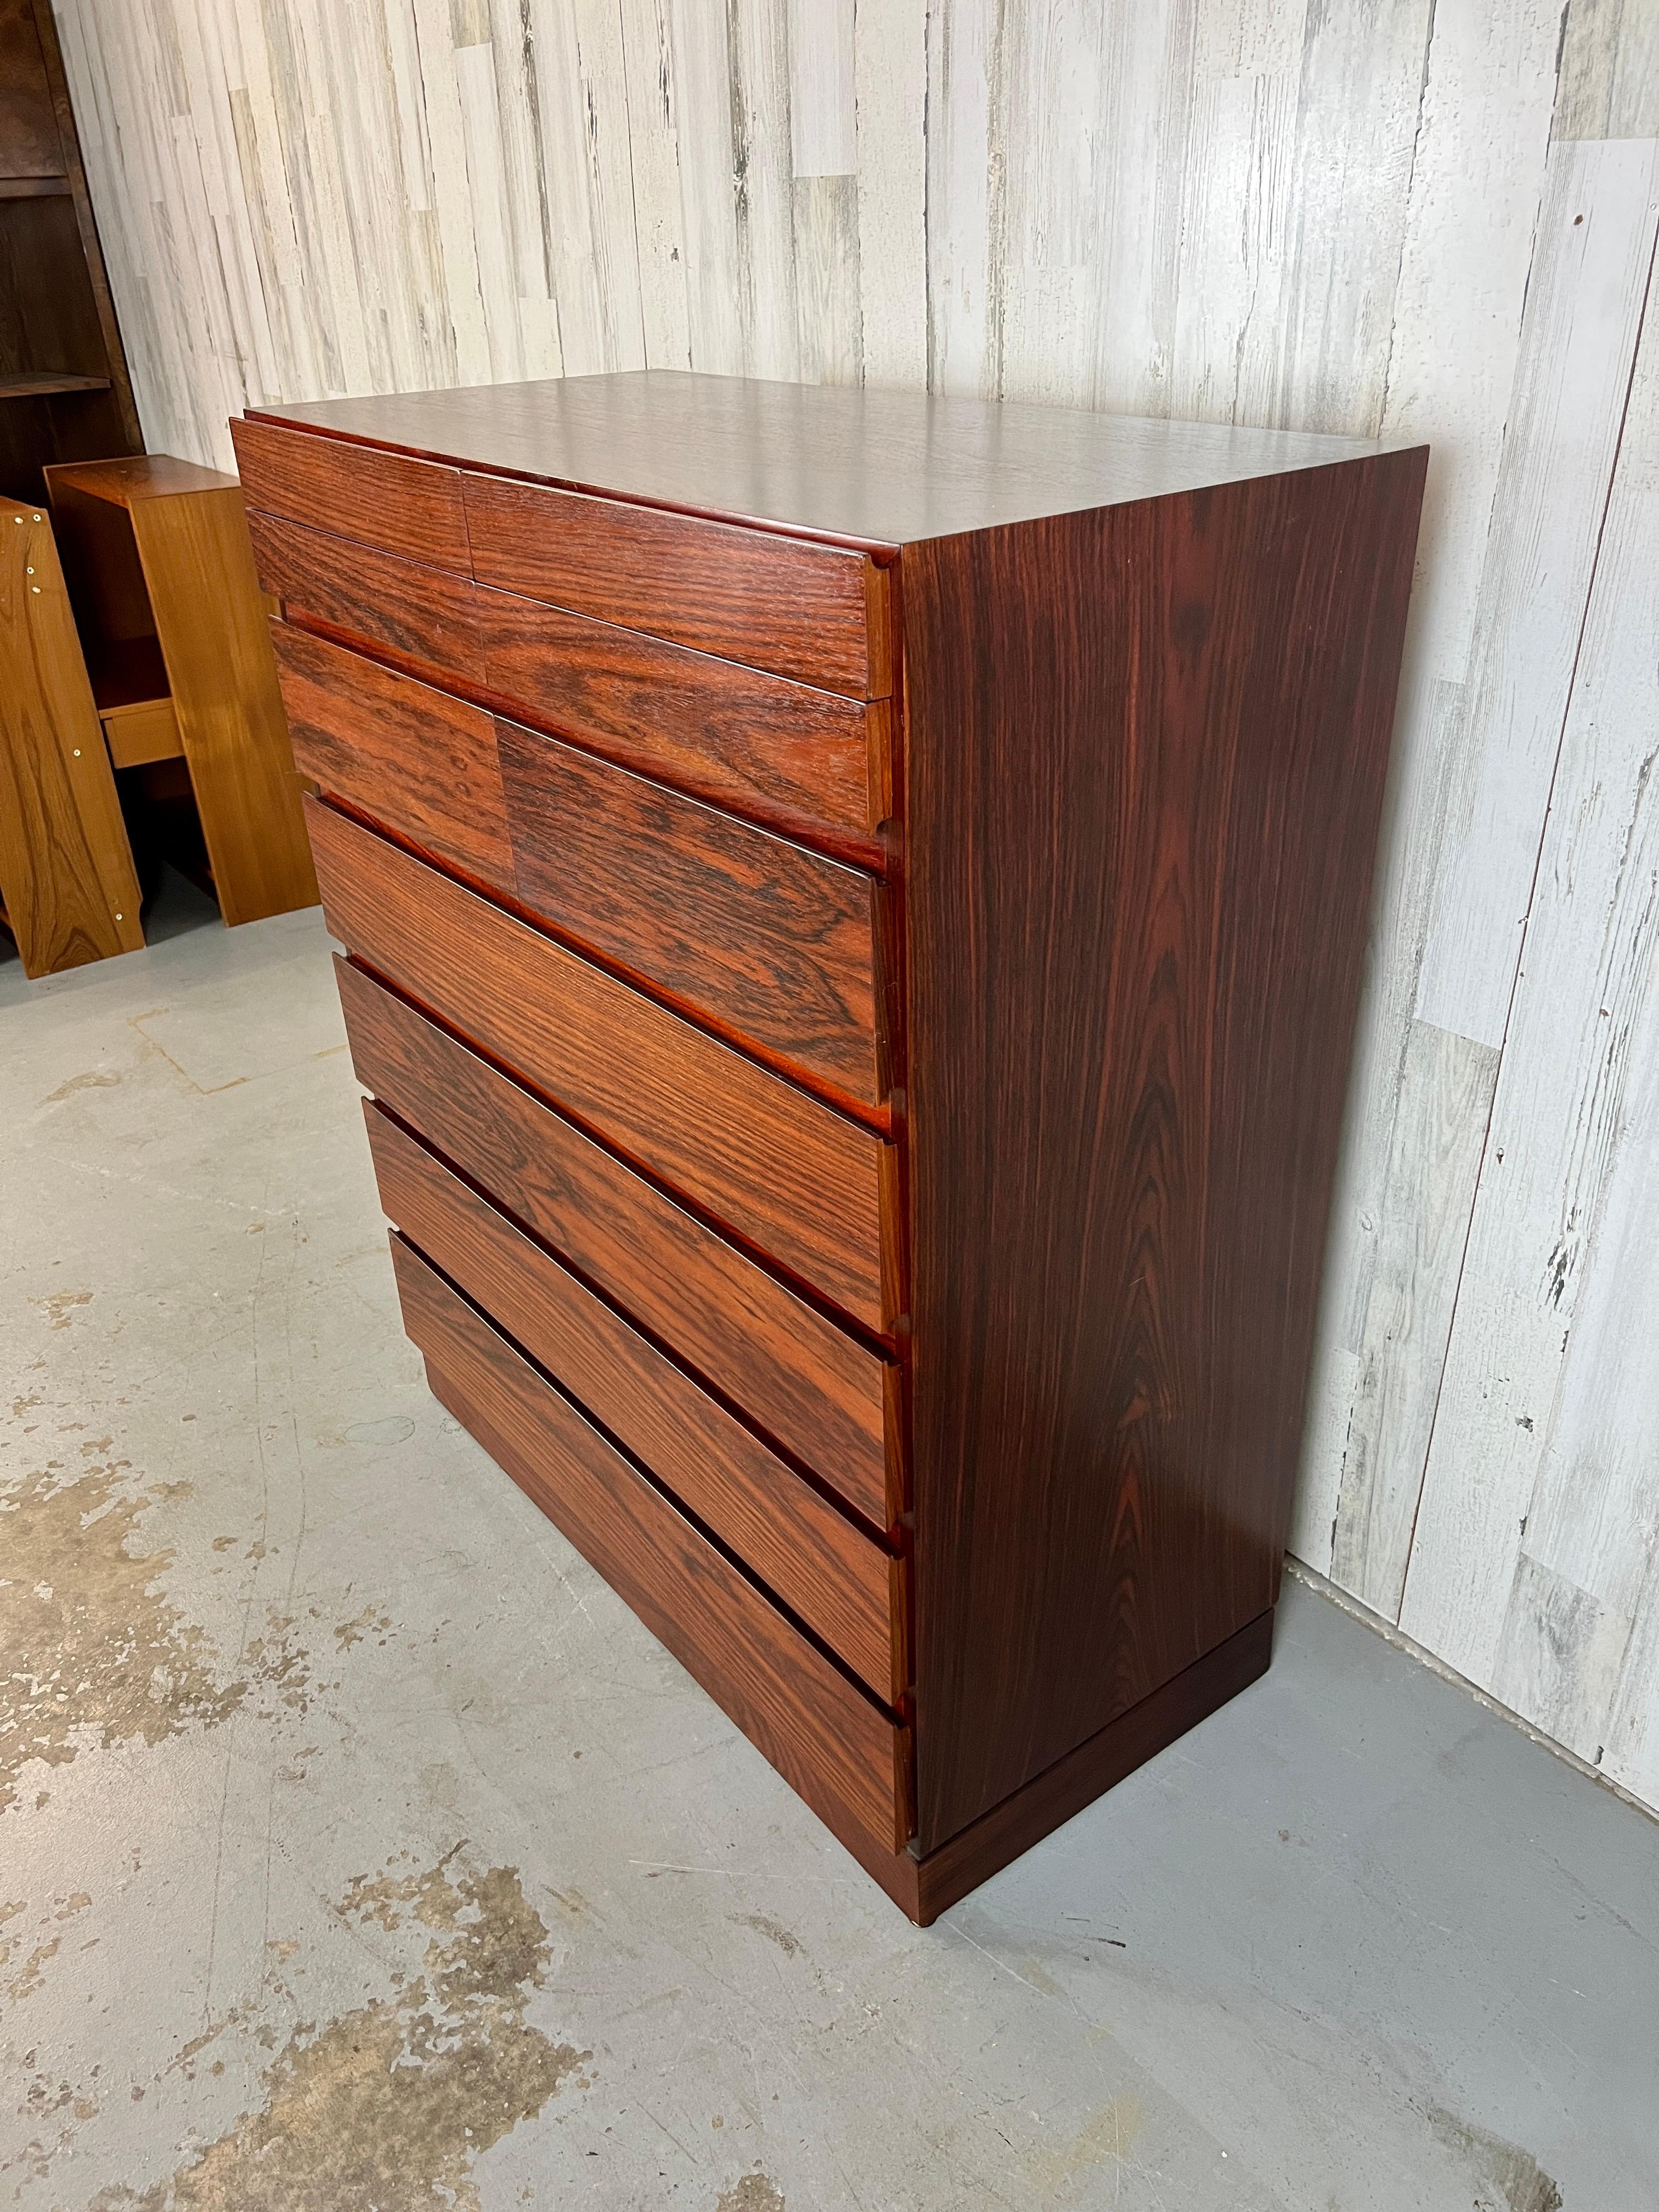 Rosewood Dresser by Arne Wahl Iversen In Good Condition For Sale In Denton, TX